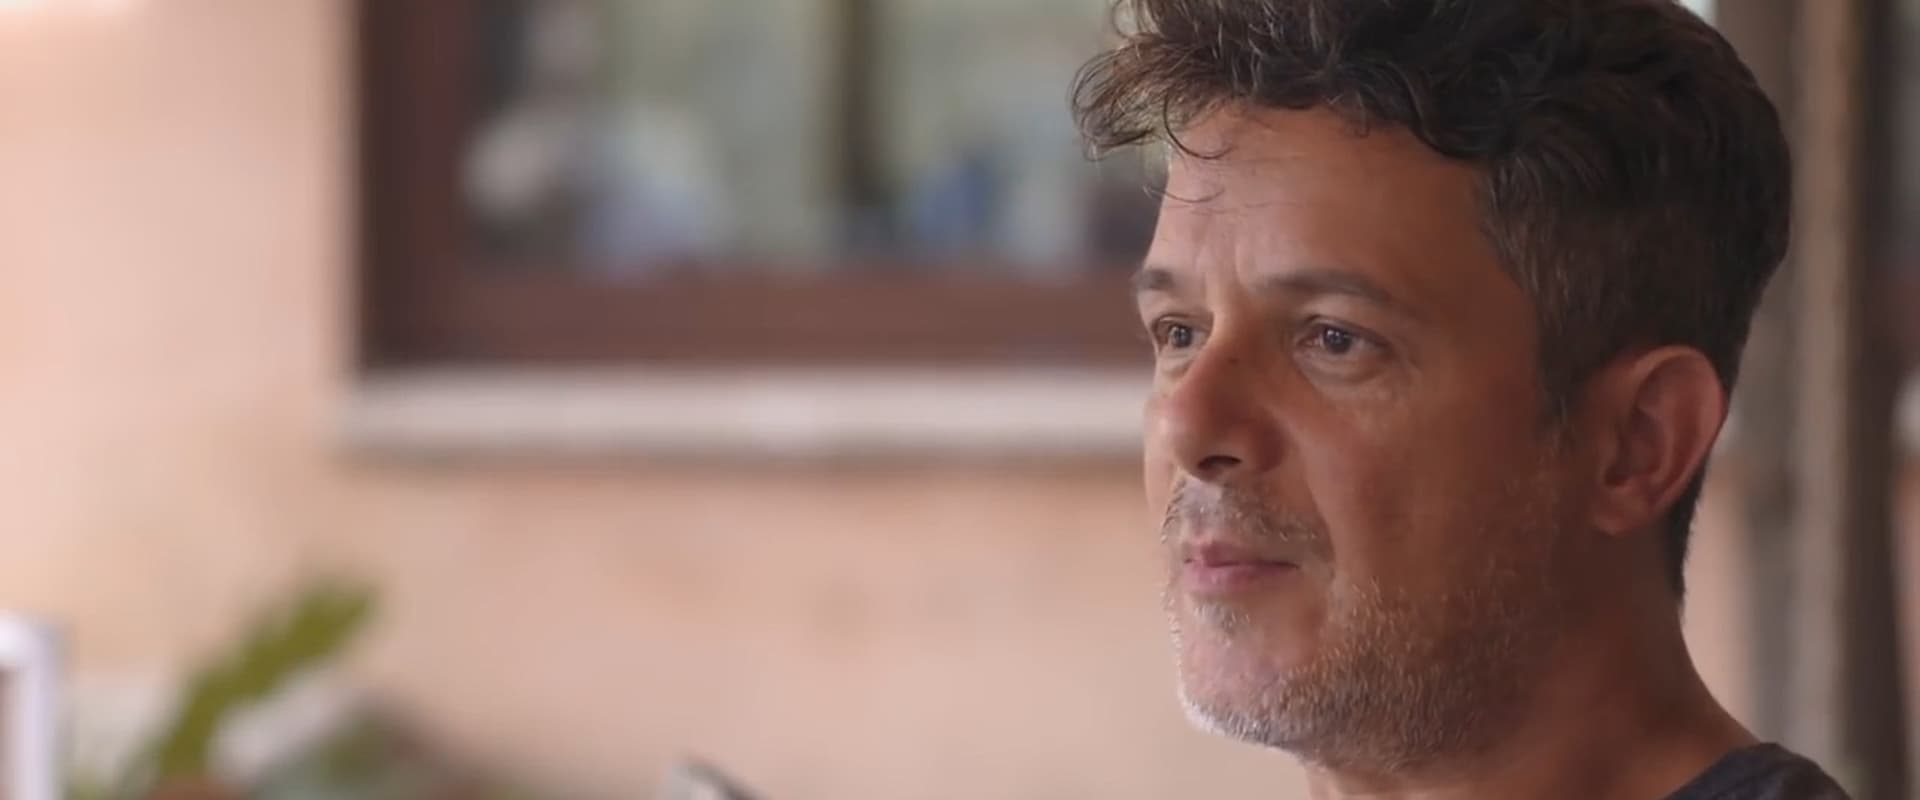 Alejandro Sanz: What I Was Is What I Am